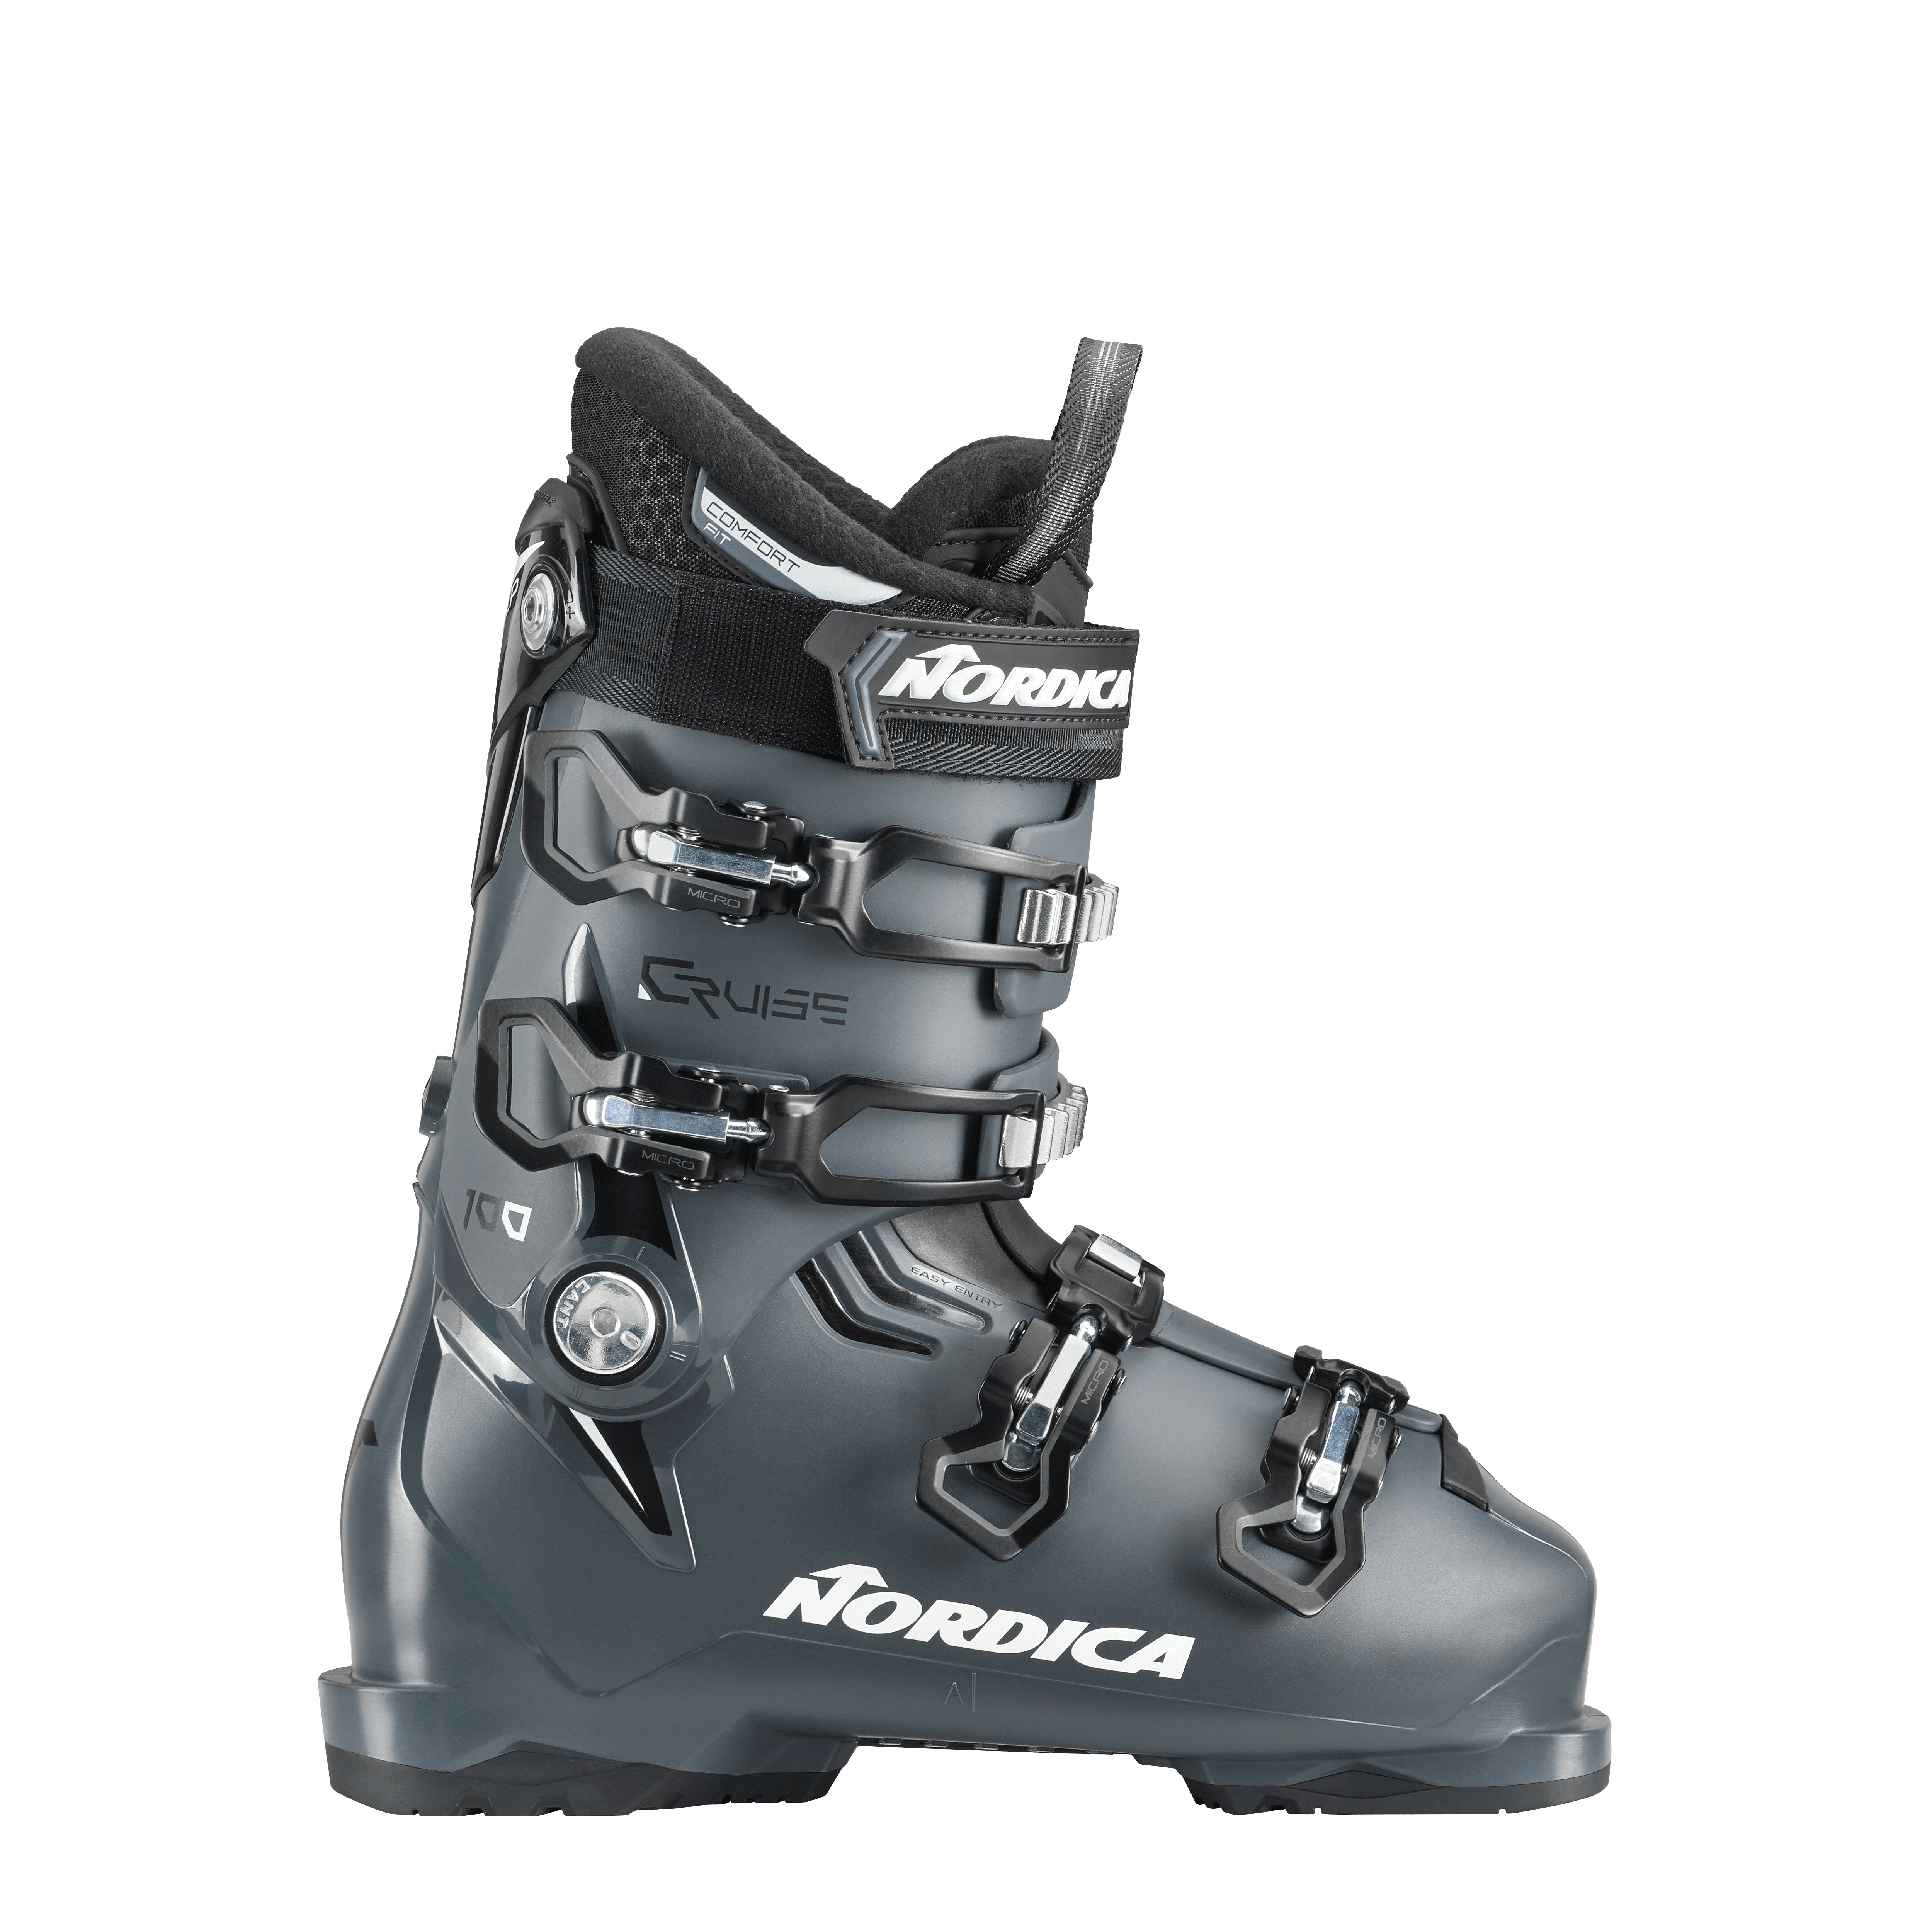 Cruise Nordica - Skis and Boots – Official website